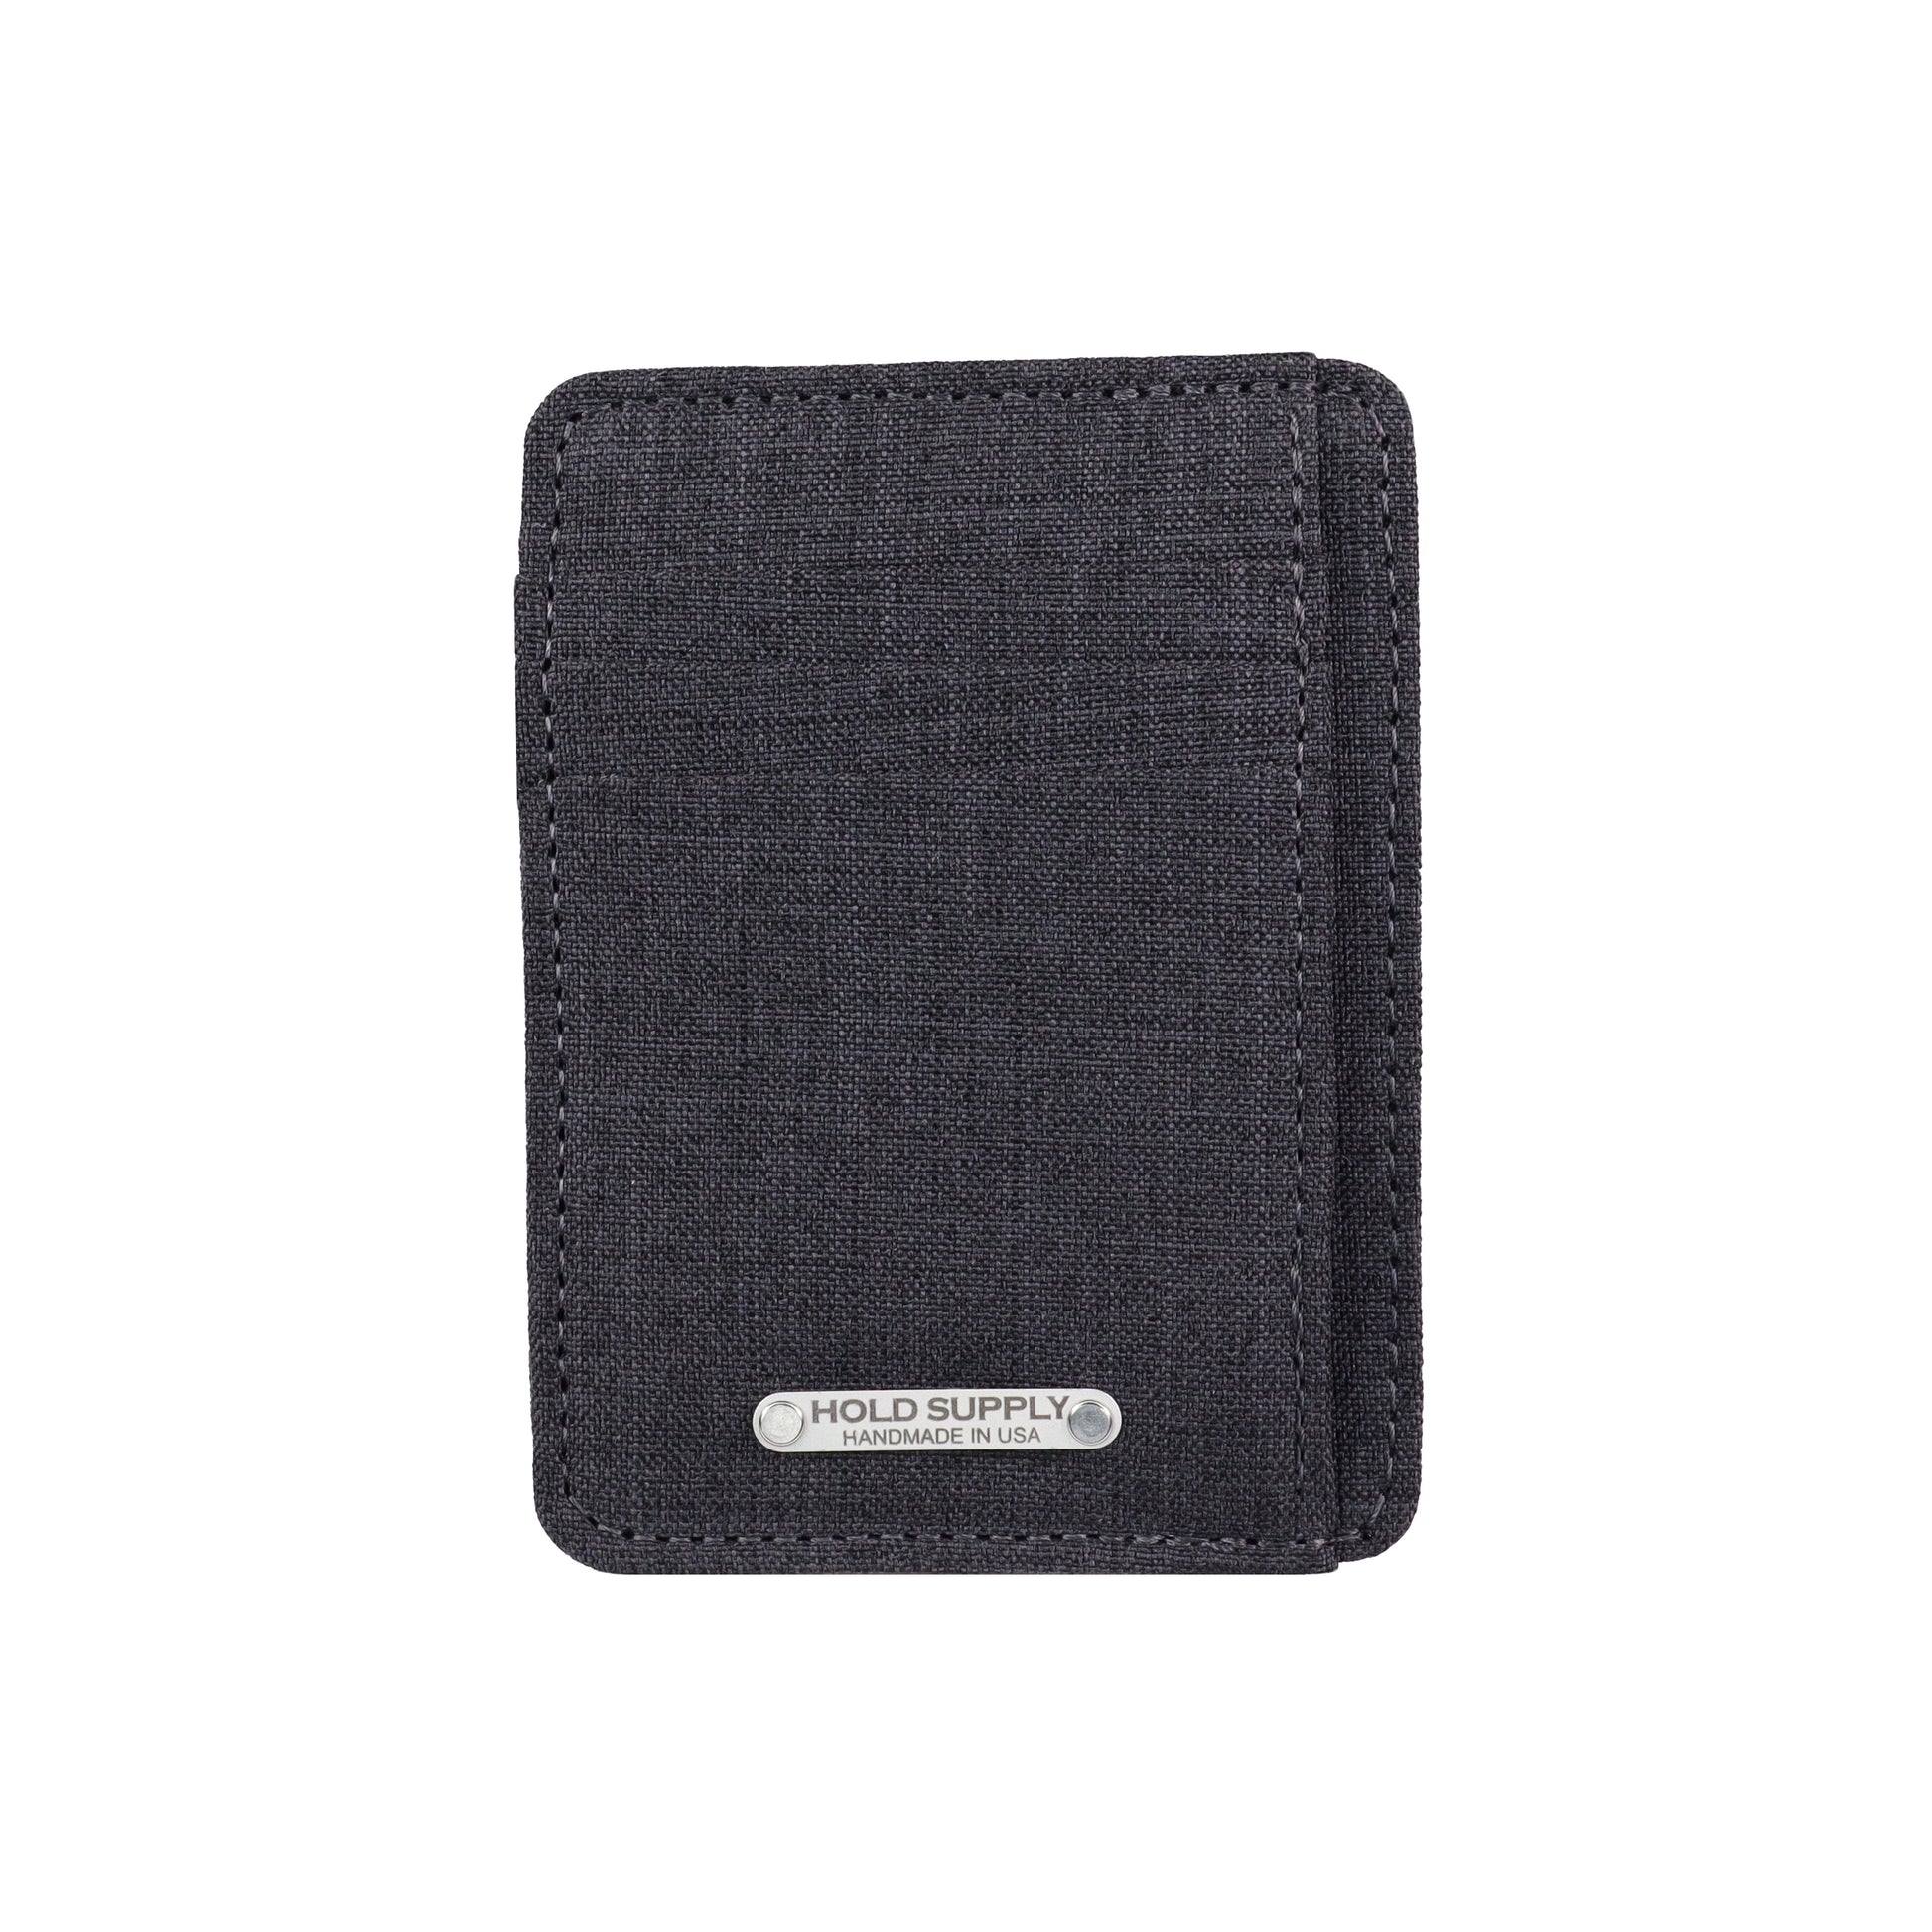 Gray Fabric Front Pocket Wallet